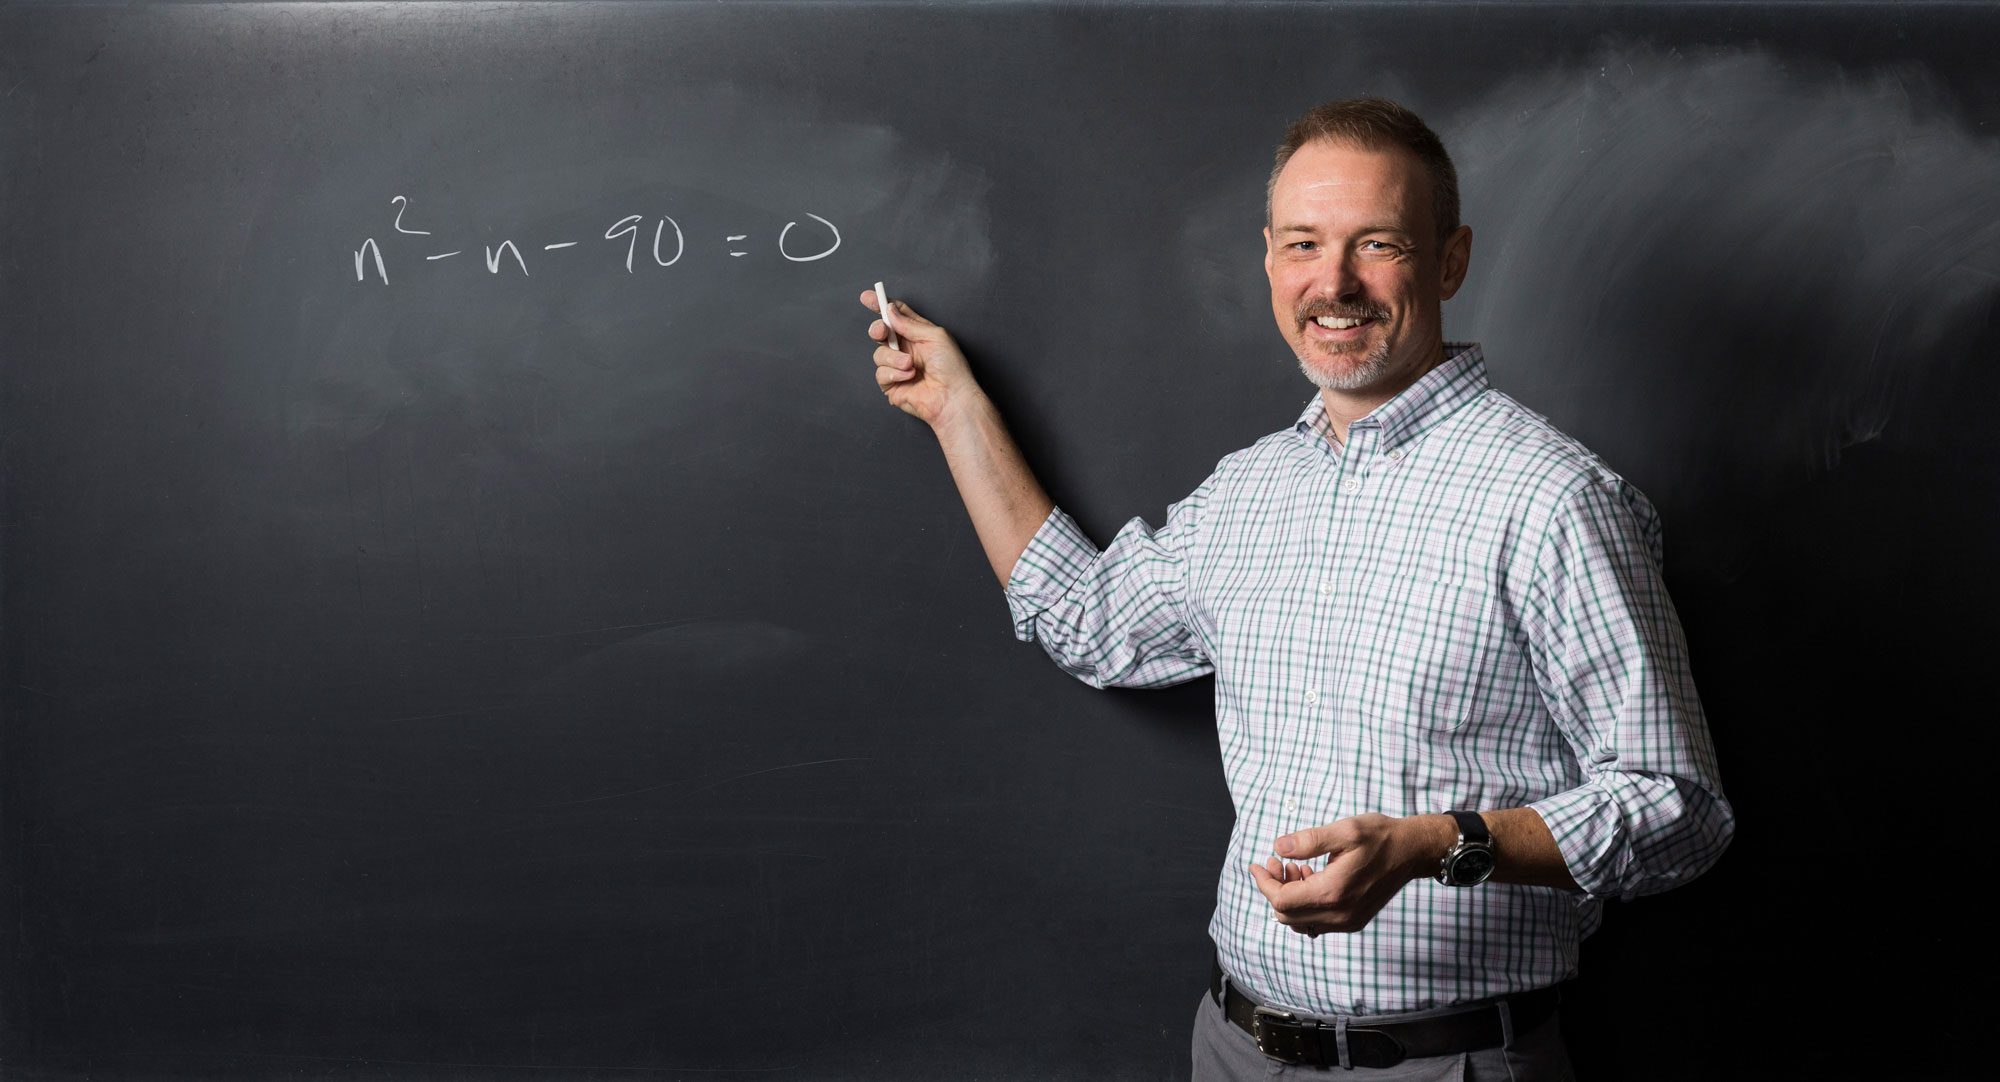 Kevin Knudson points to math equation written on chalkboard